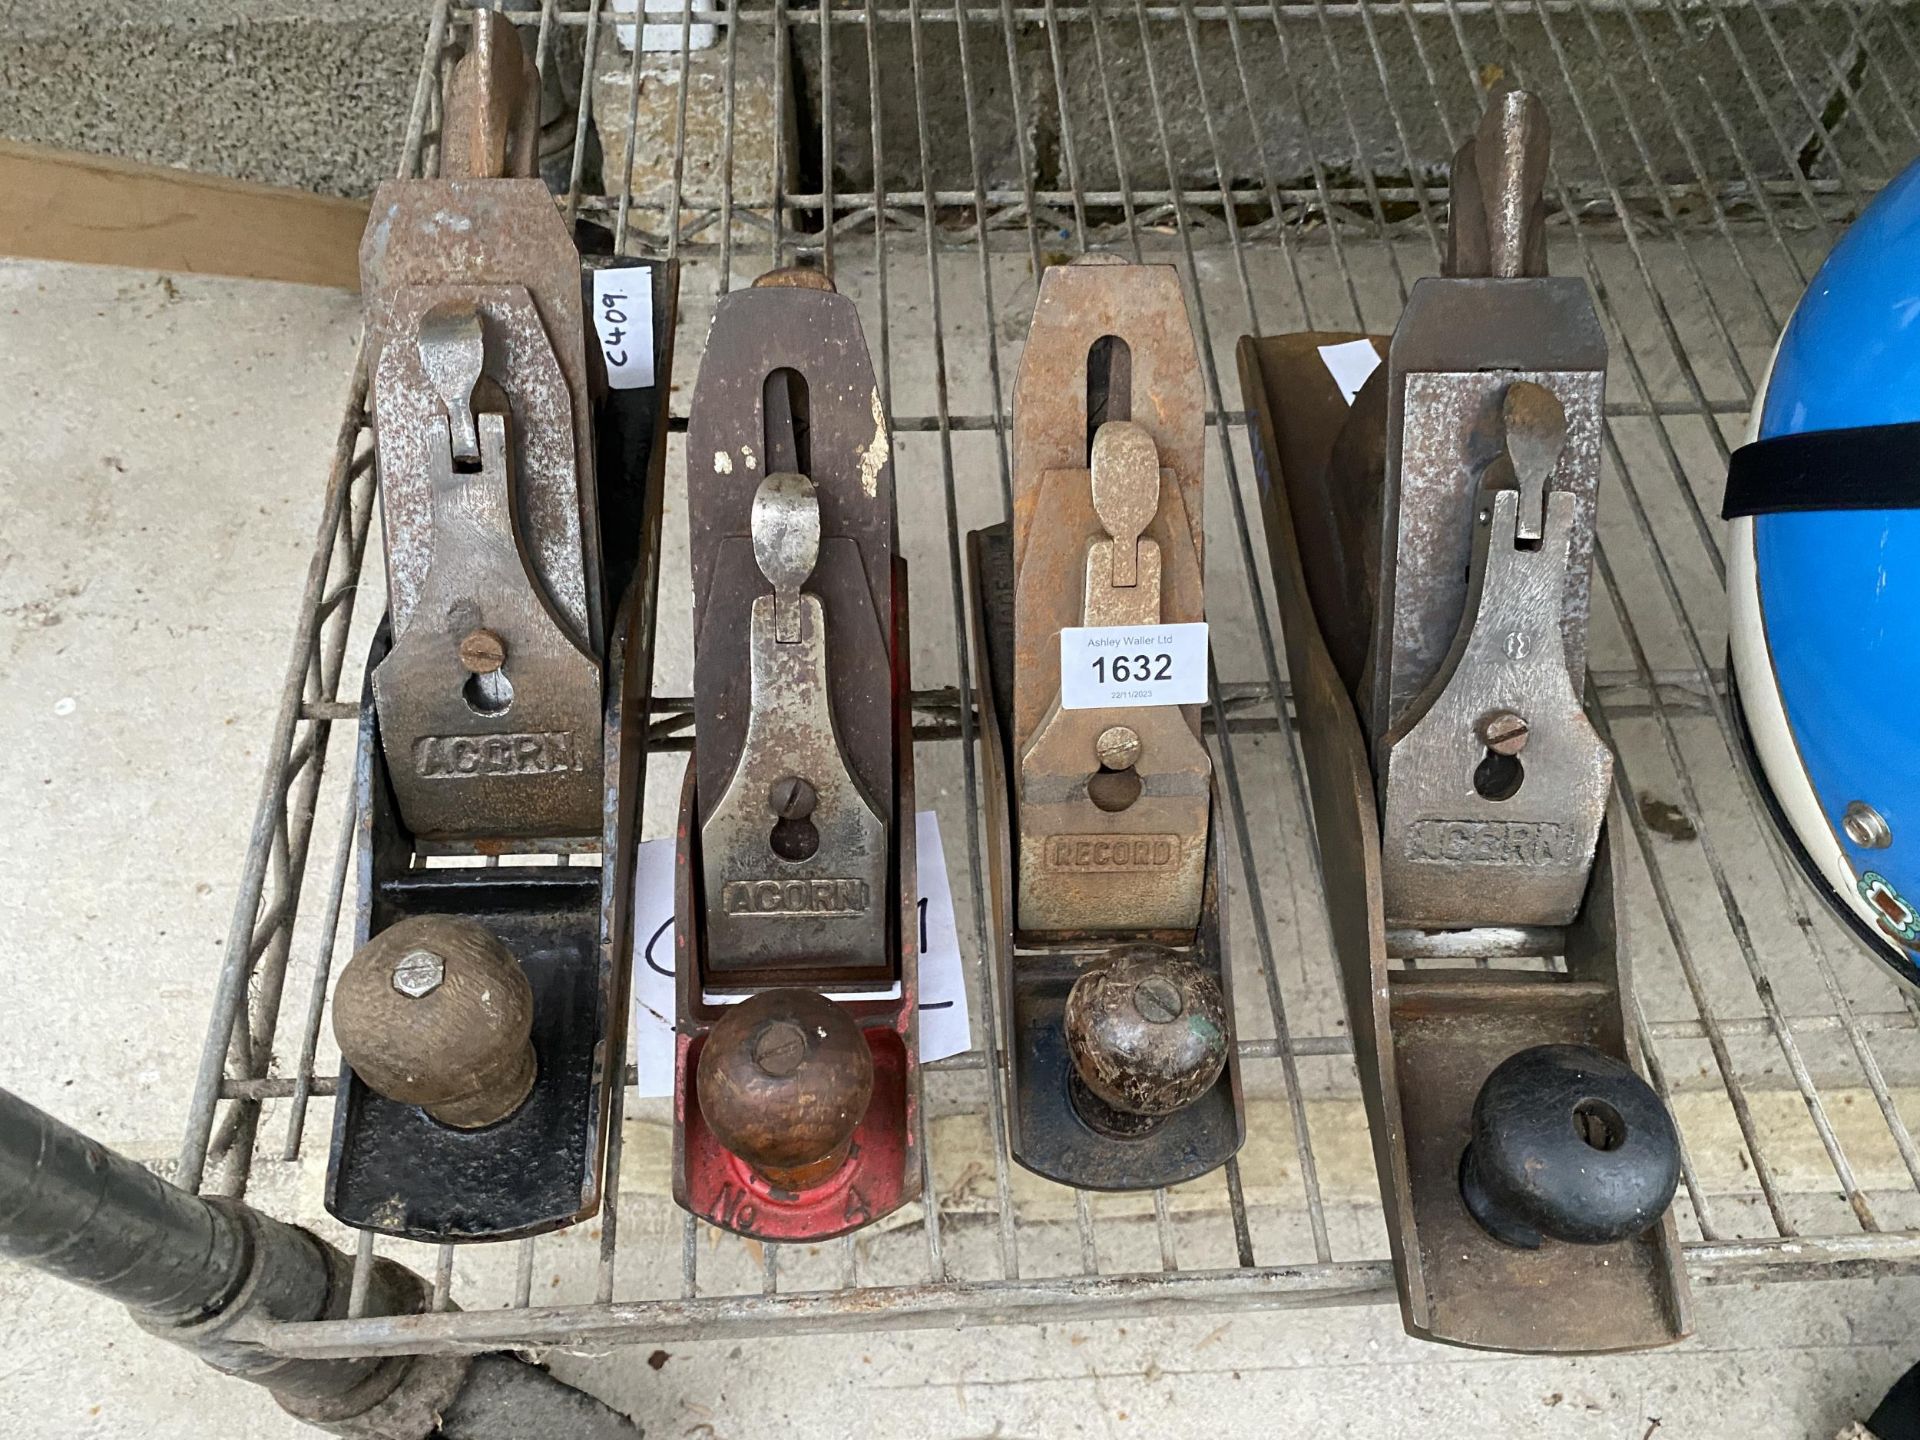 FOUR VINTAGE WOOD PLANES TO INCLUDE RECORD AND ACORN